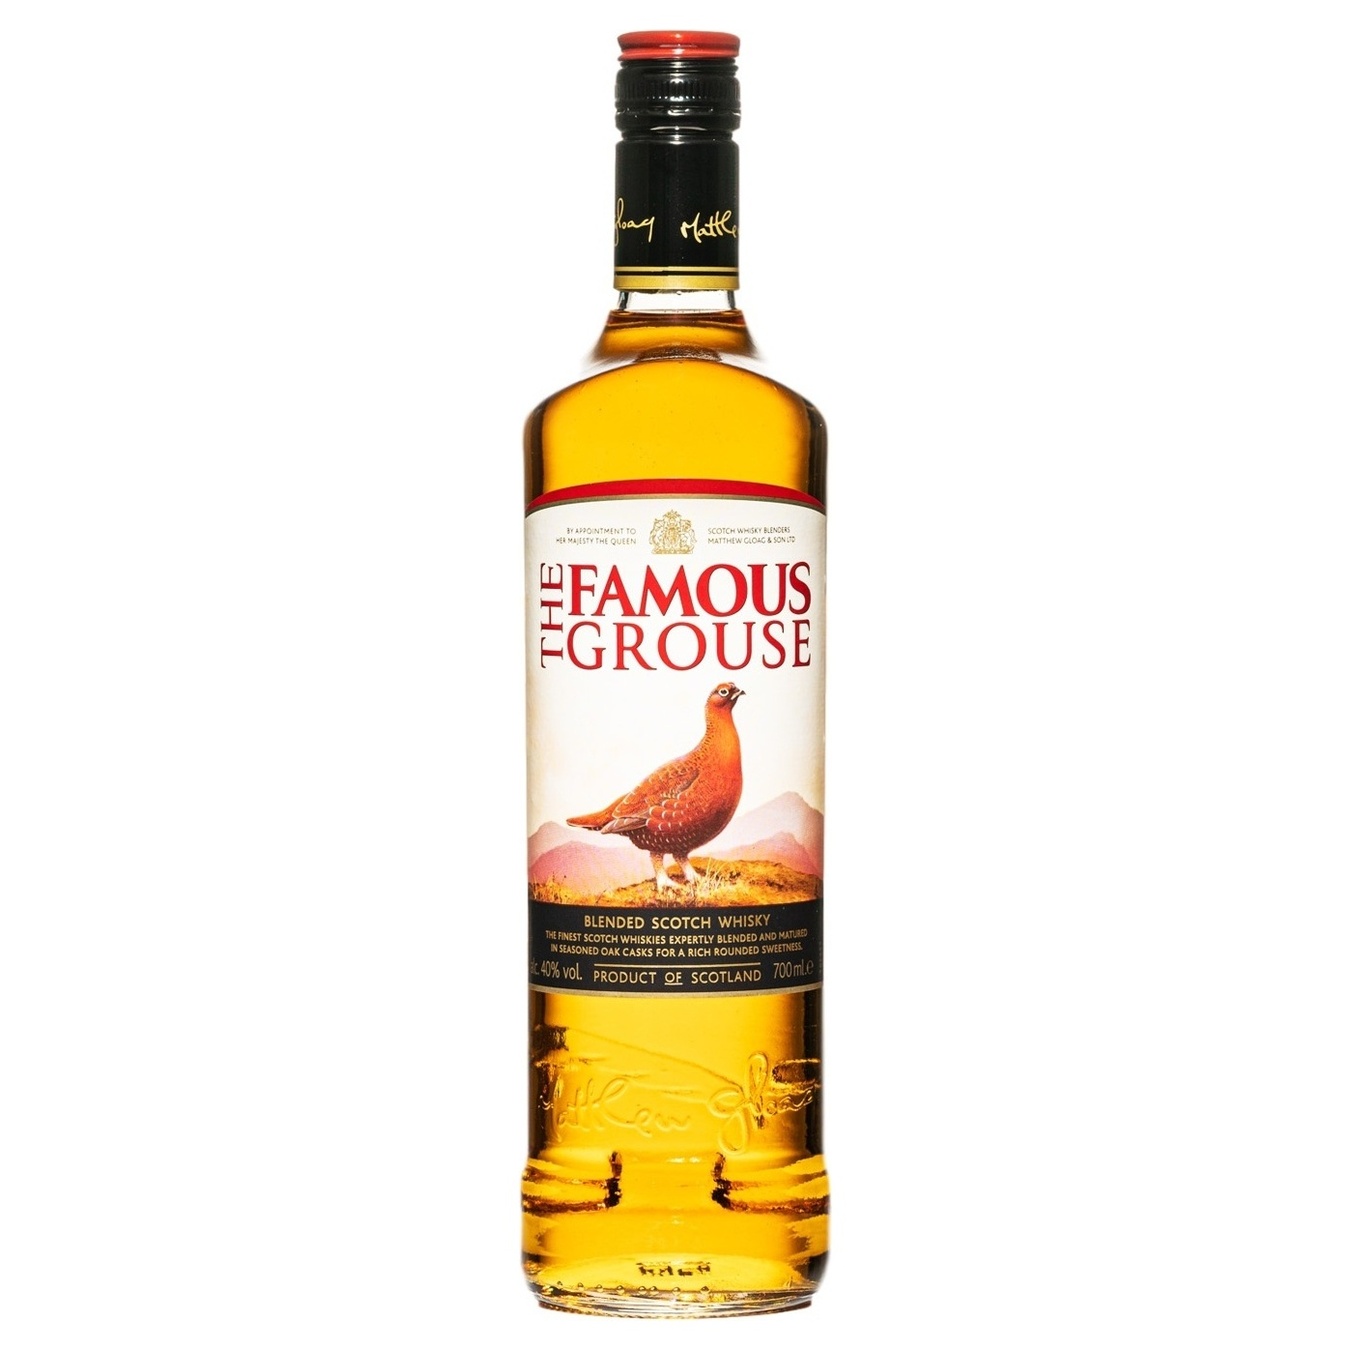 Famous Grouse Blended Scotch Whisky 40% 0.5L null - onesize - 1